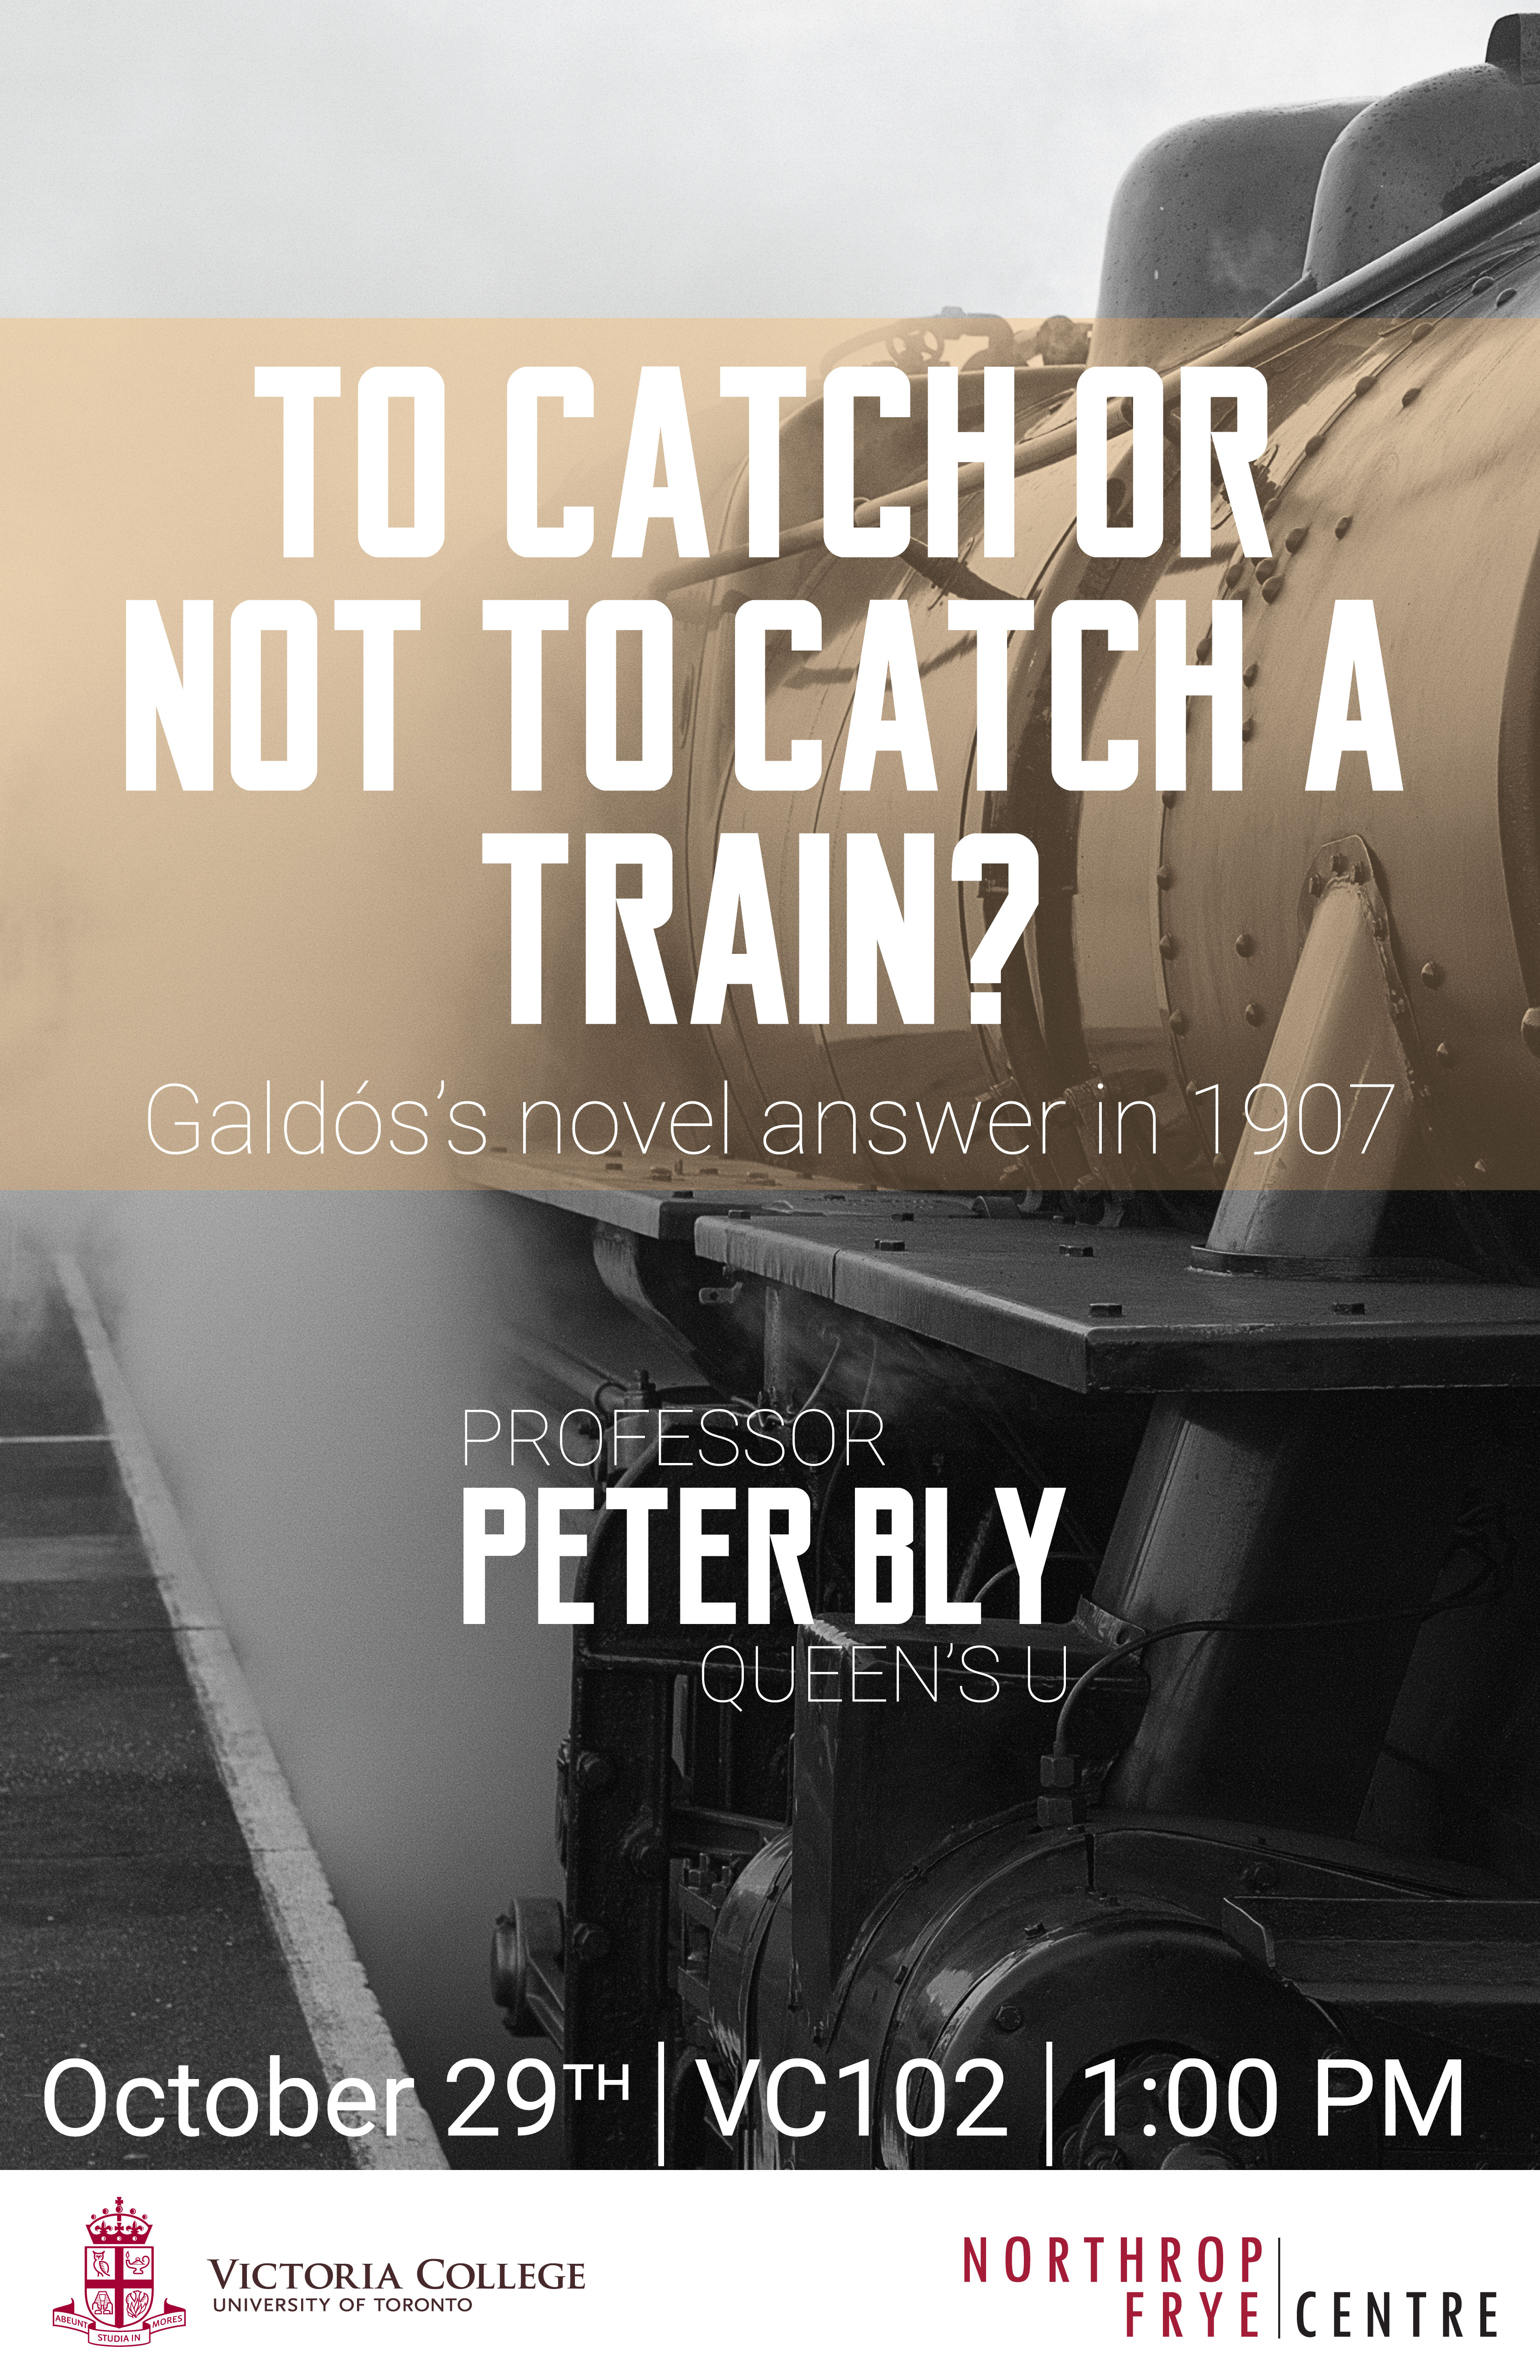 Oct. 29, 2018 | To Catch or not to Catch a Train? | Peter Bly